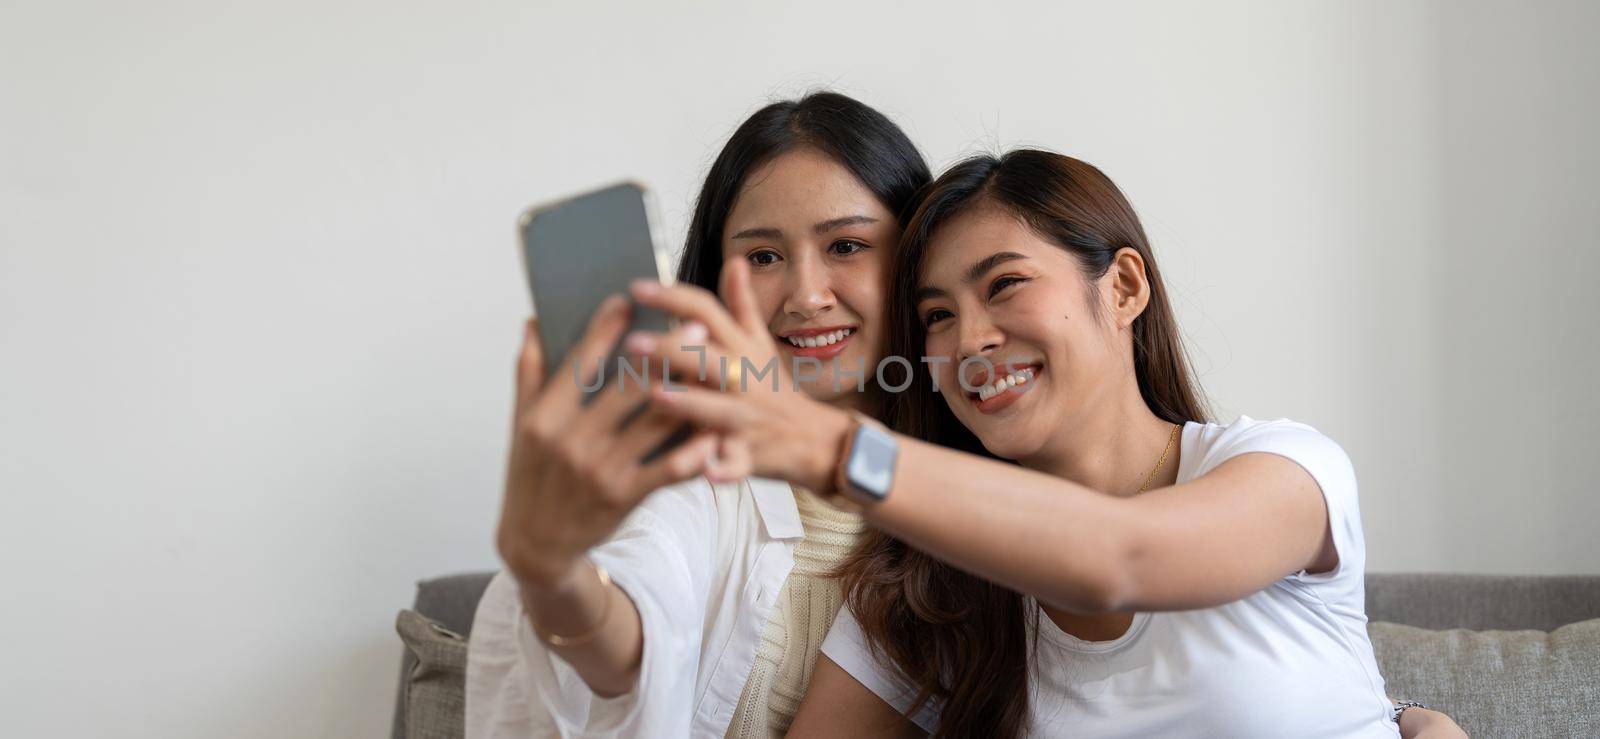 Asian beautiful lesbian or friends using mobile phone to take selfie together on couch. LGBT, Technology and Lifestyle Concept